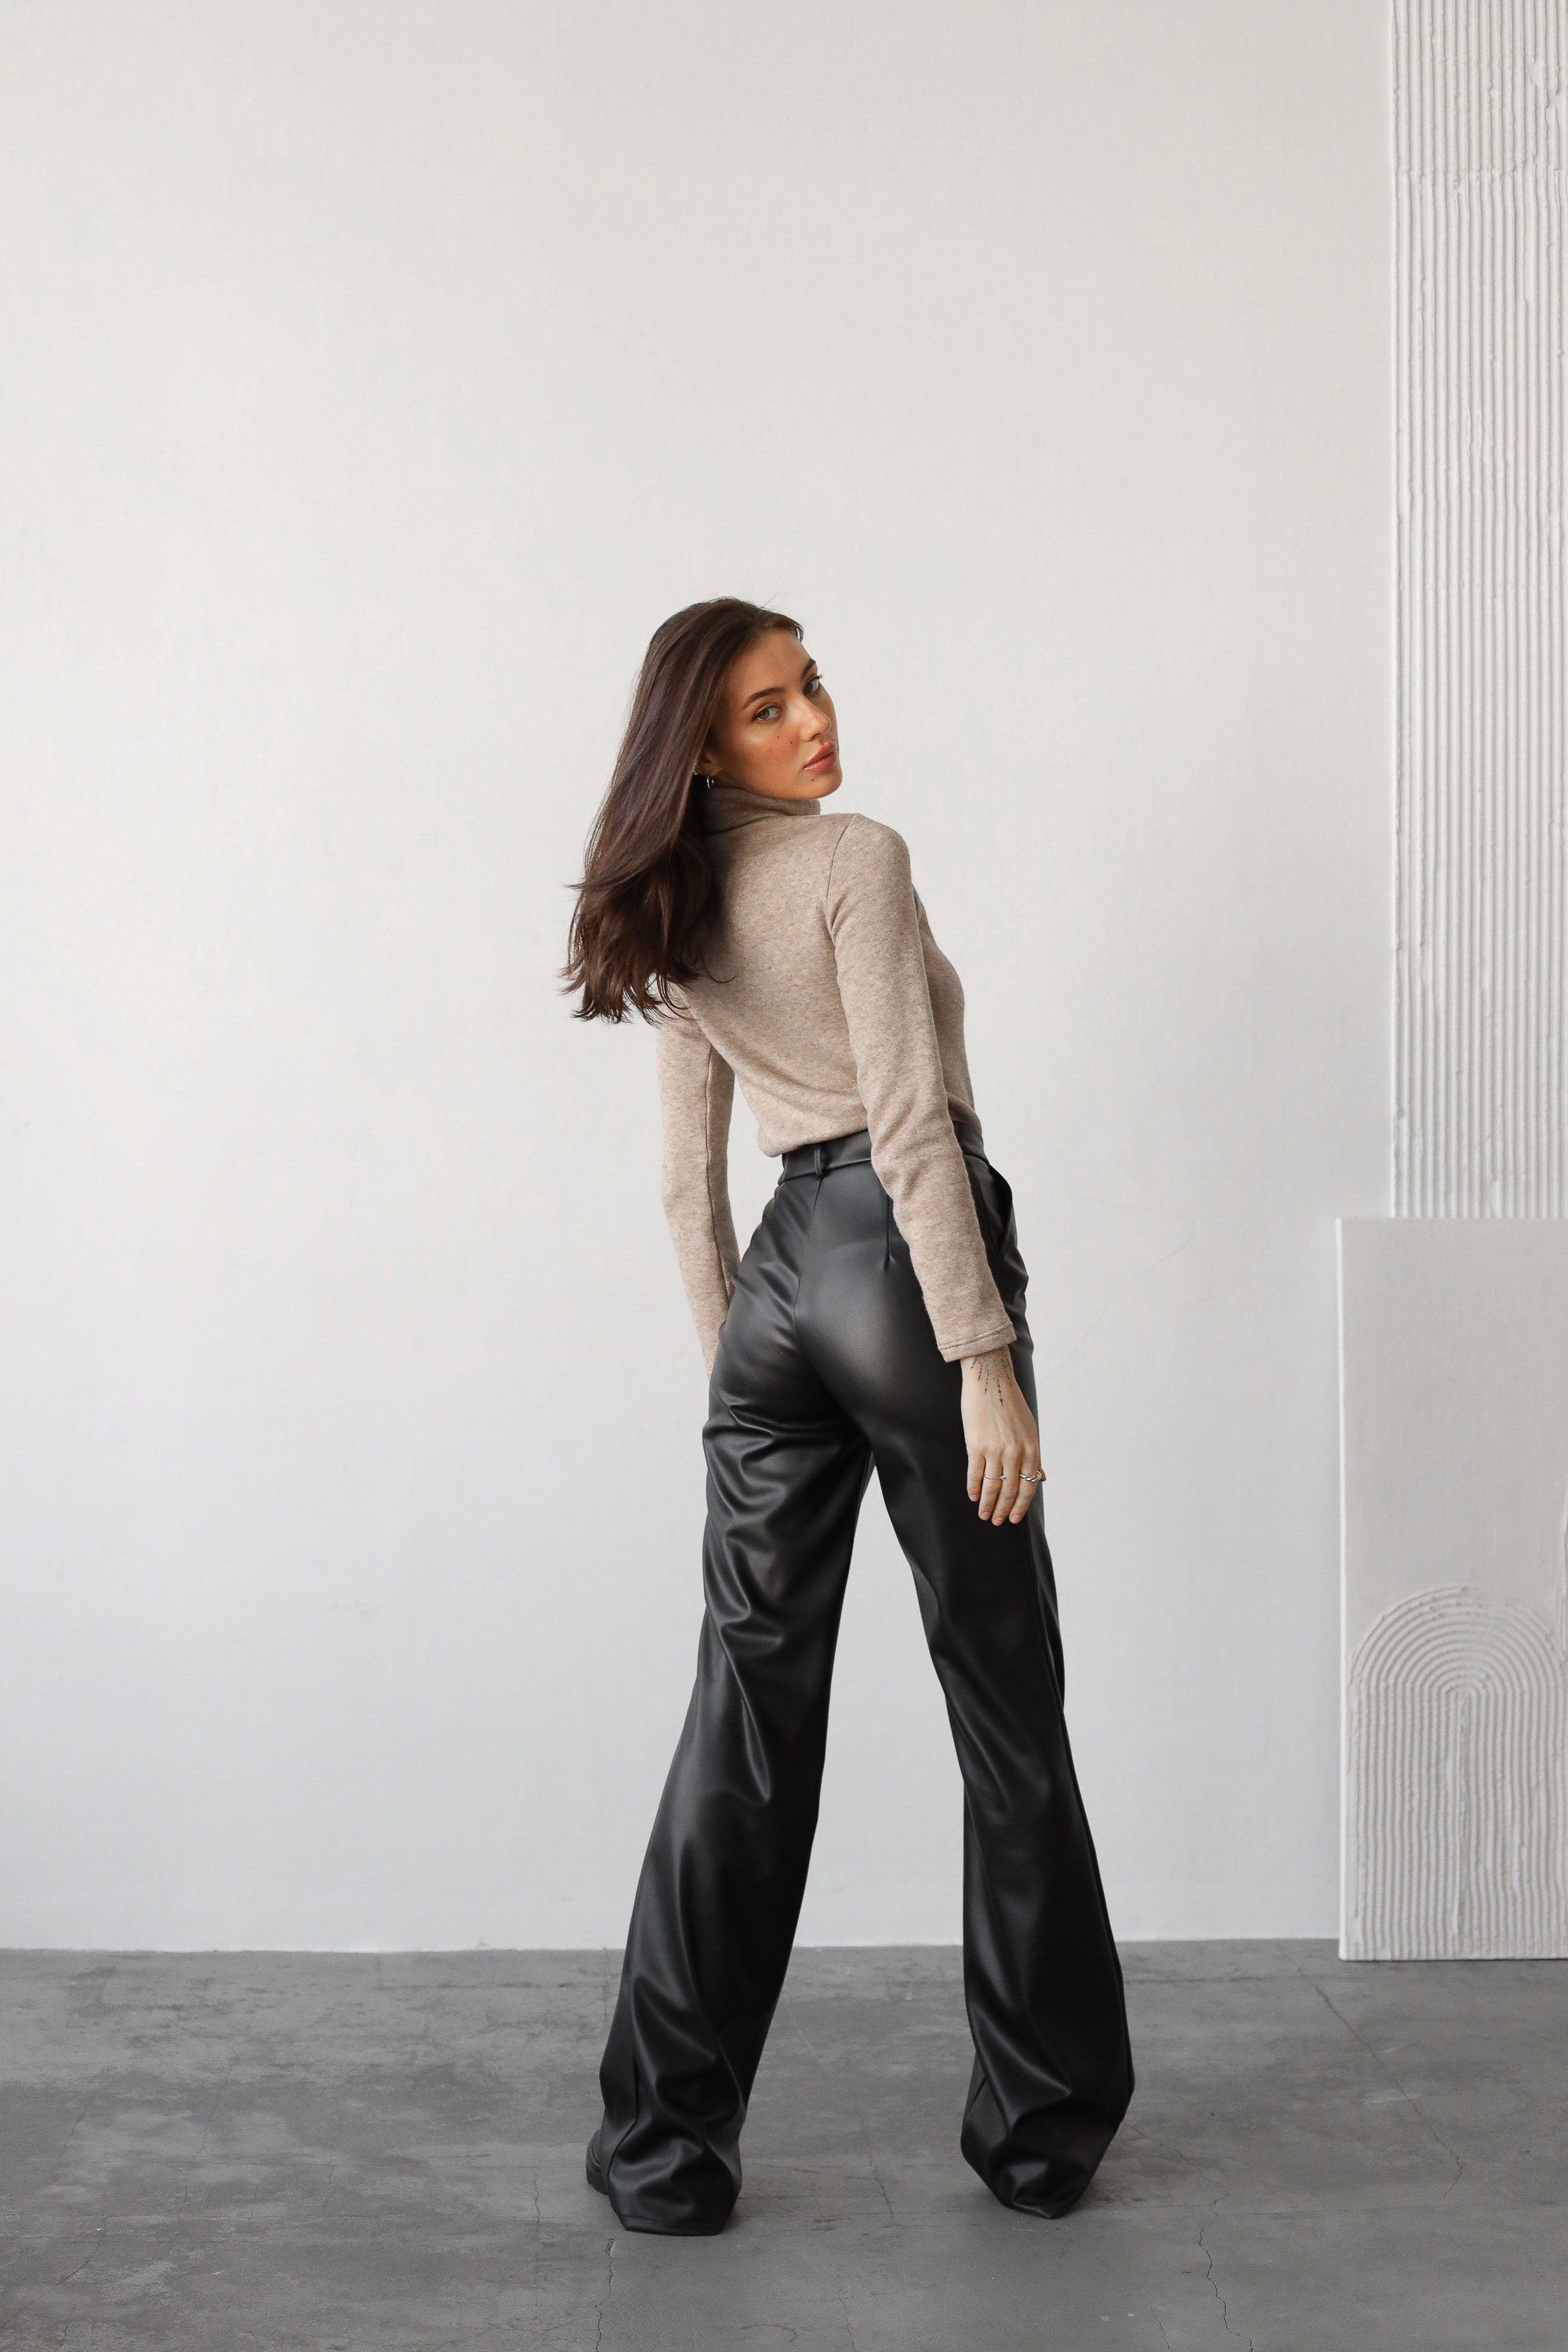 Vegan Leather Pants Women, Faux Leather Pants Women, Leather Bell Bottoms  Trousers, Black Leather Pants for Women, Leather Flares 